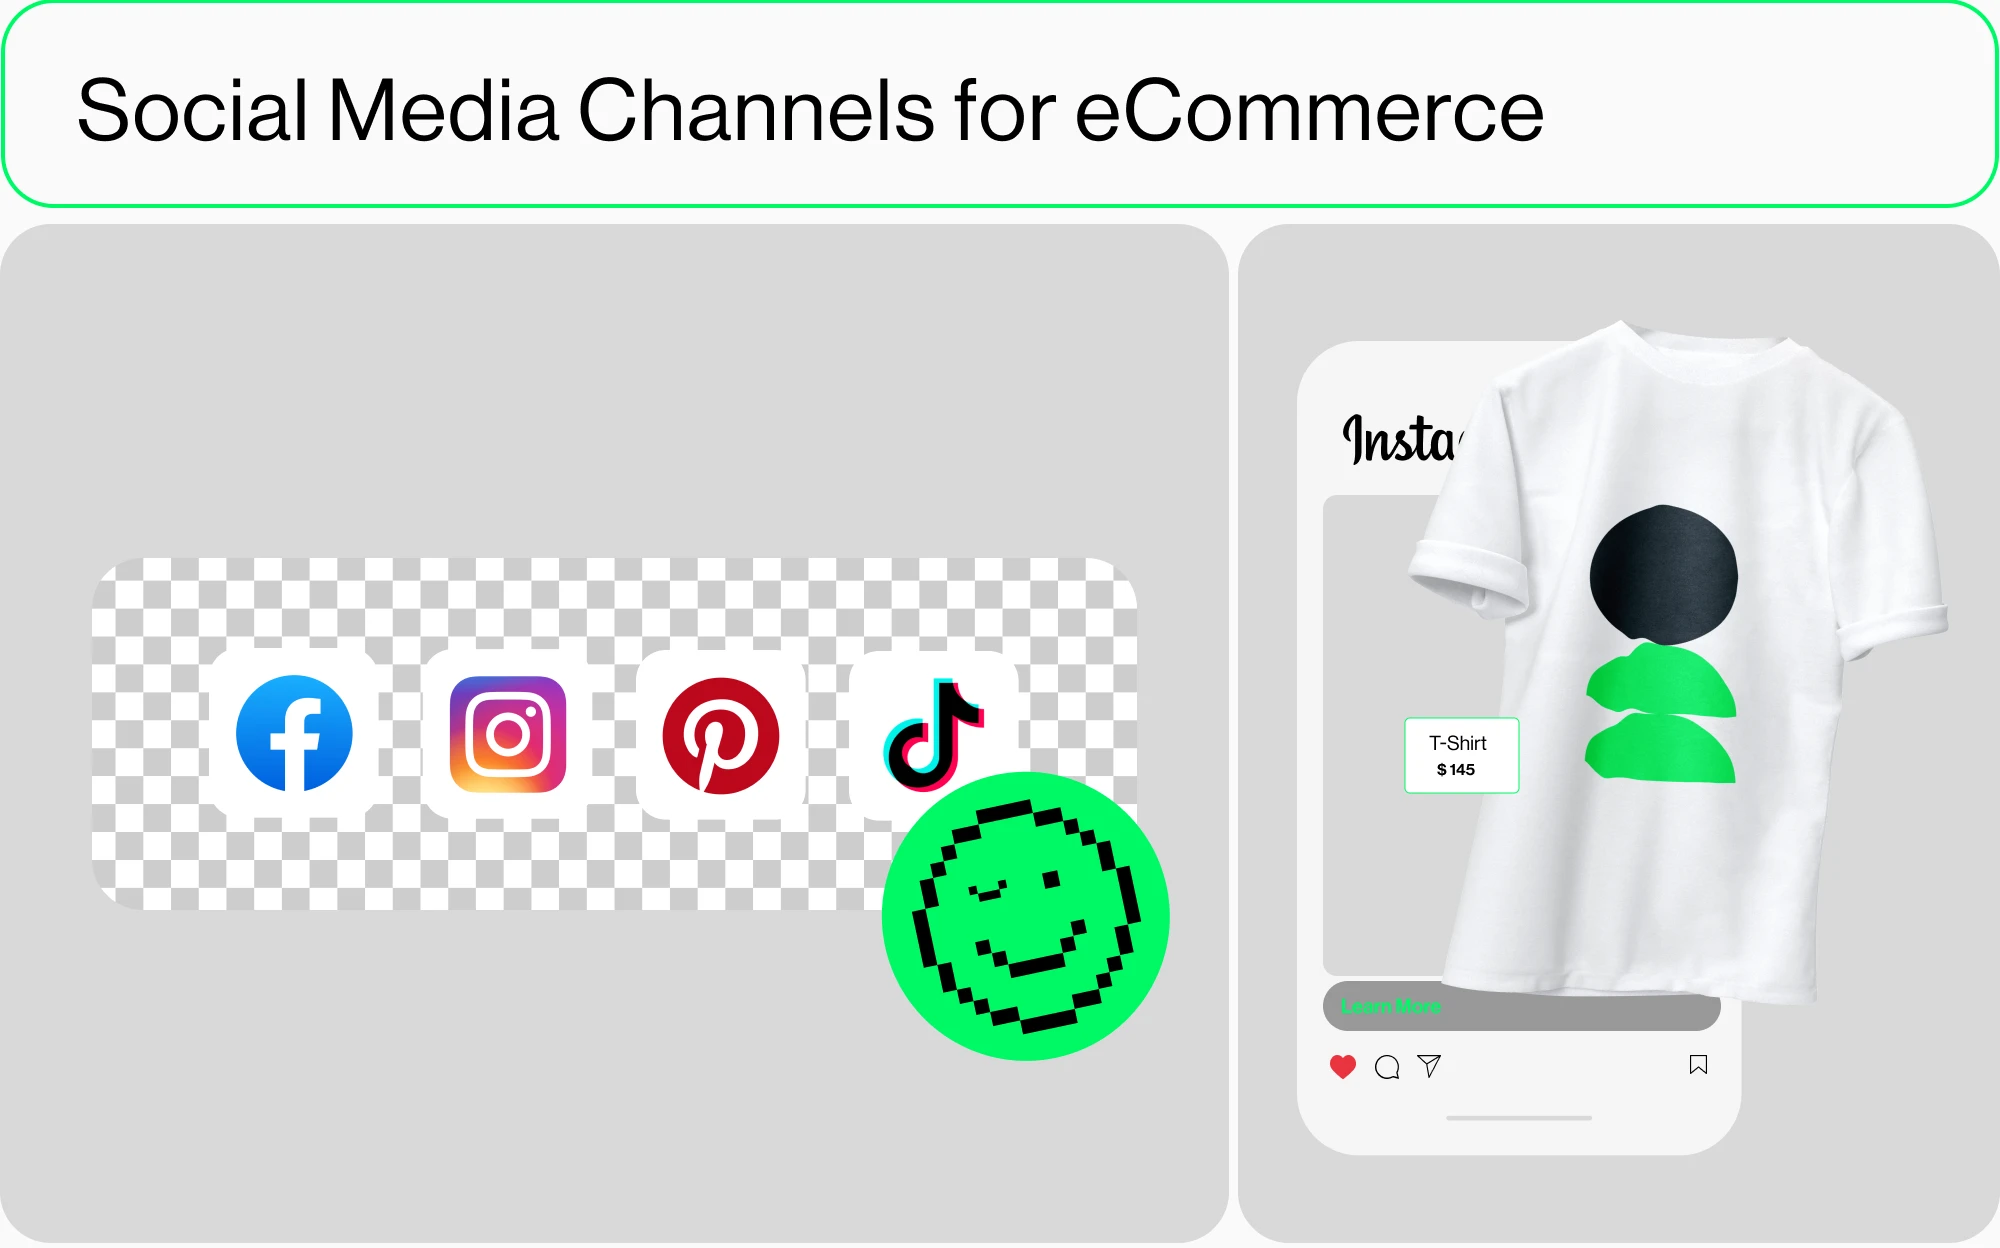 Social Media Channels for eCommerce: How to Use Social Media to Boost Conversions